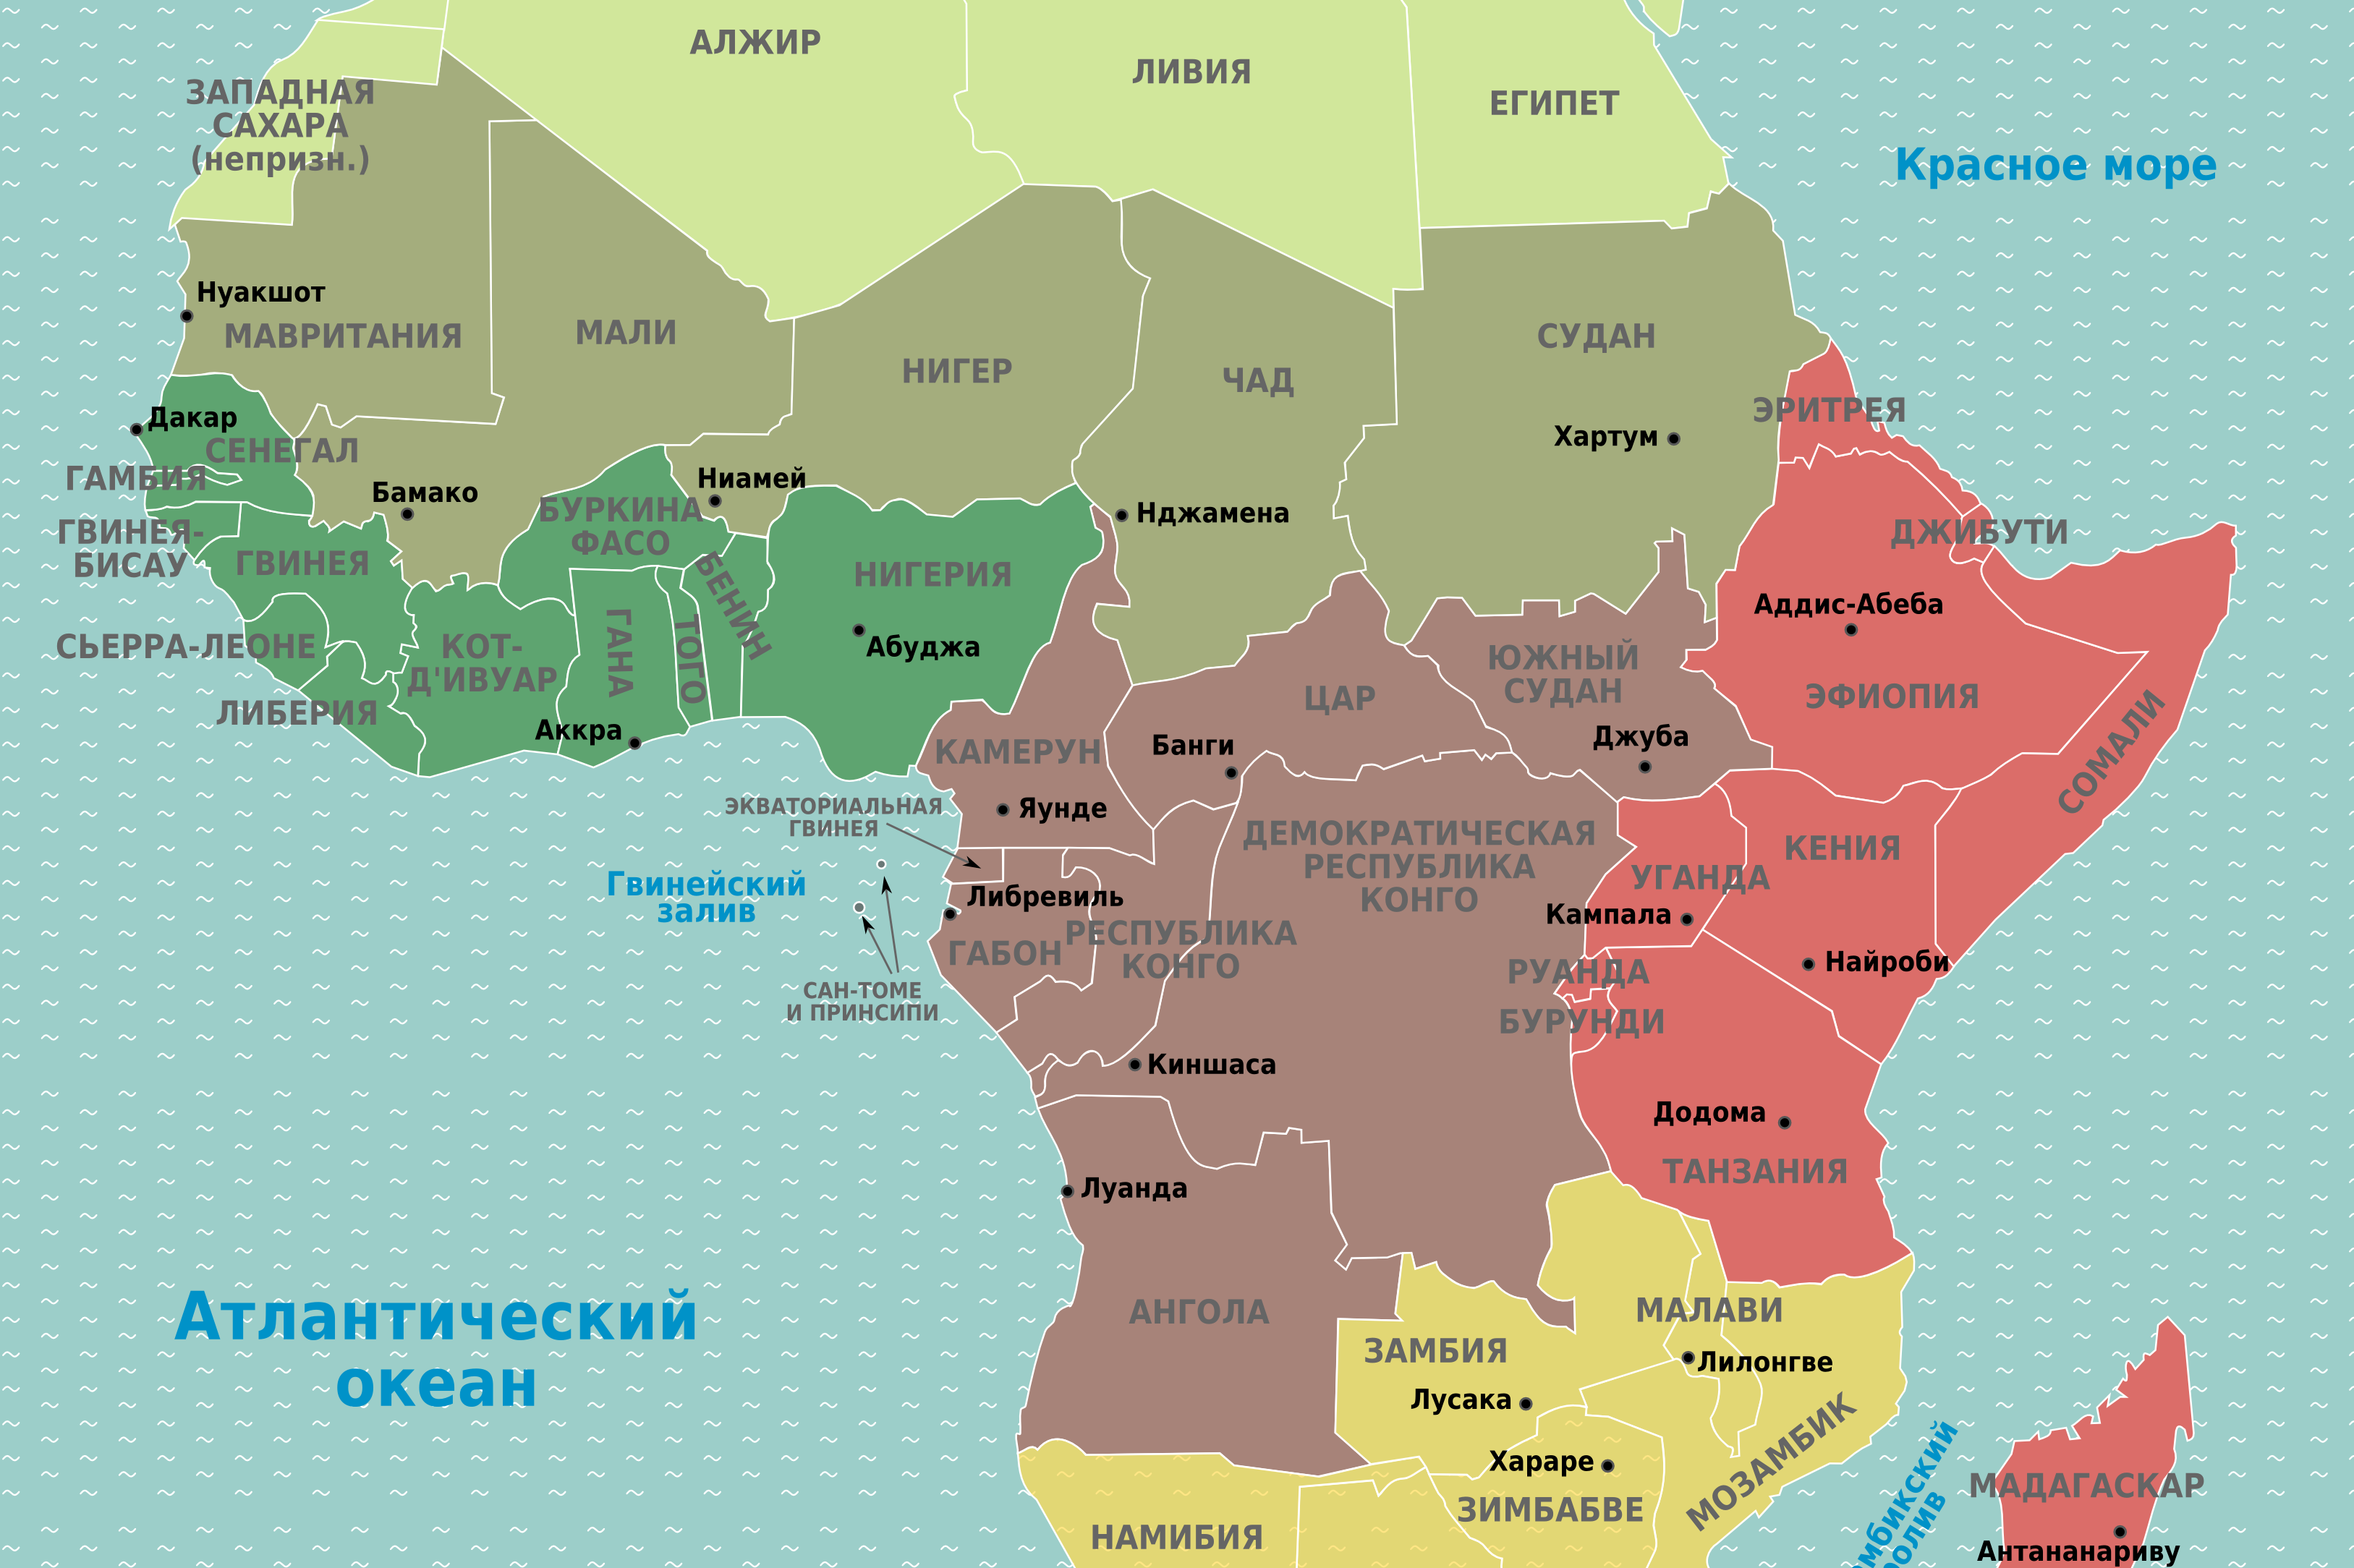 Map-Africa-Regions.png - 985.07 kB